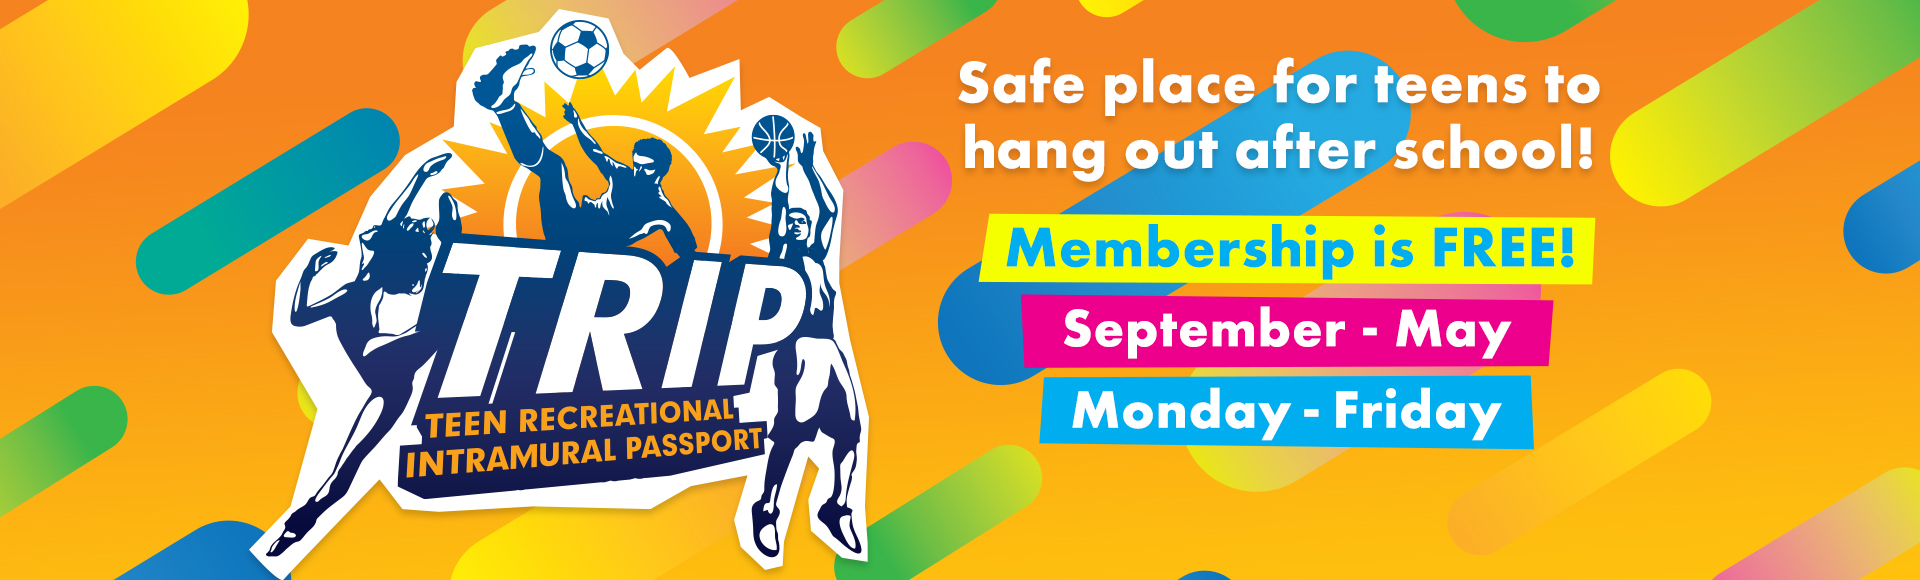 Teen Recreational Intramural Passport. Safe place for teens to hang out after school. Membership is free. September to May, Monday to Friday. TRIP logo on colorful patterned background.